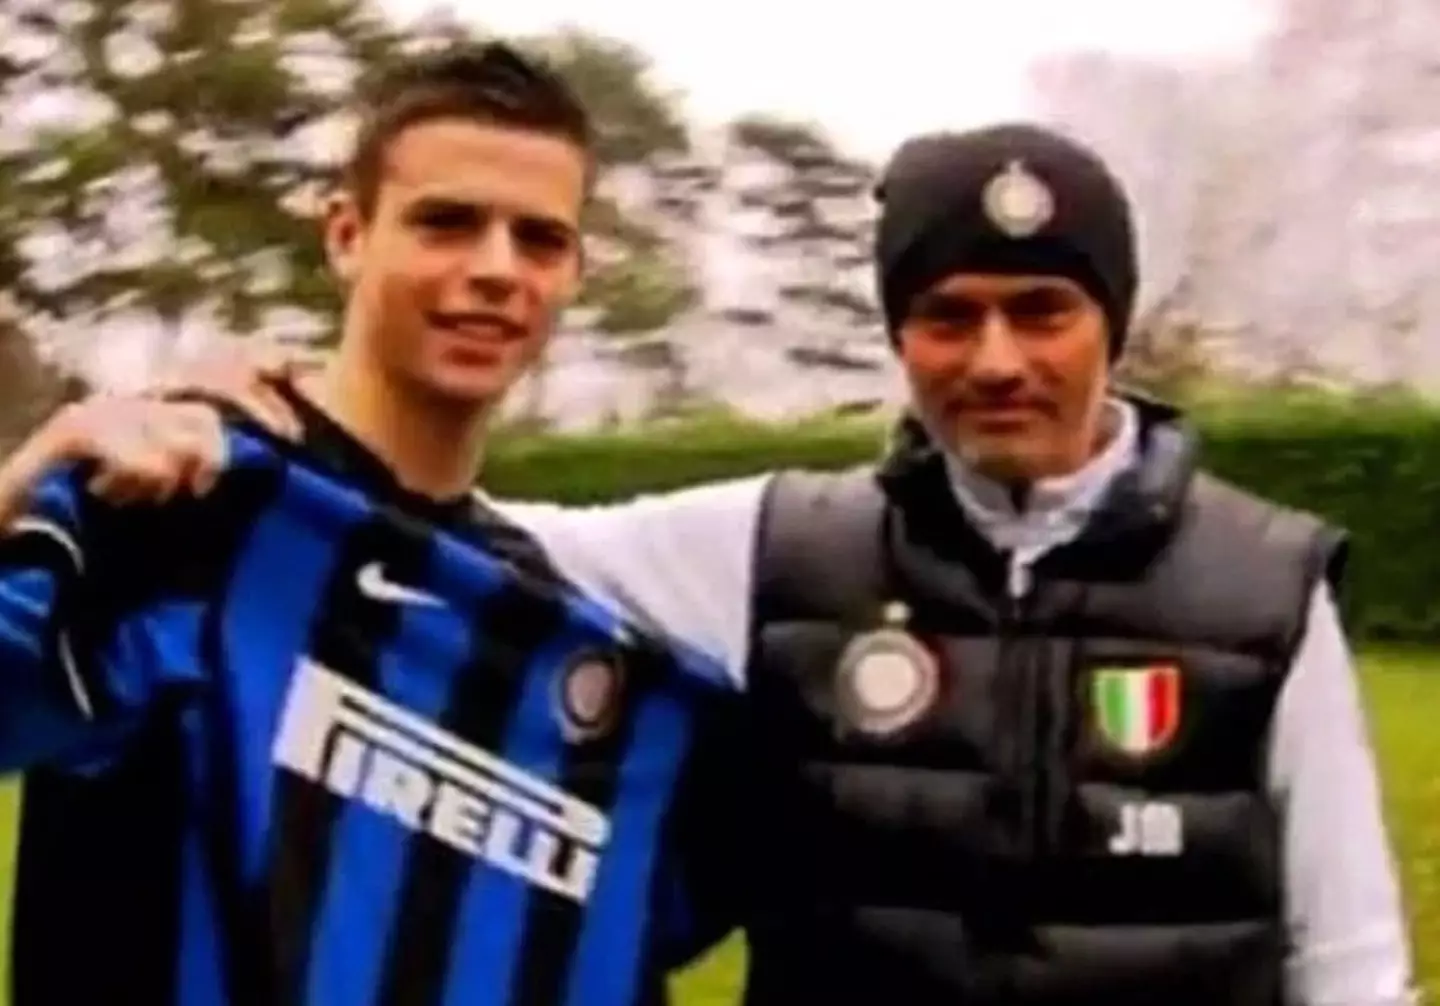 Ben Greenhalgh won a six-month contract with Inter Milan in 2009 (Image: Instagram/BenGreenhalgh17)